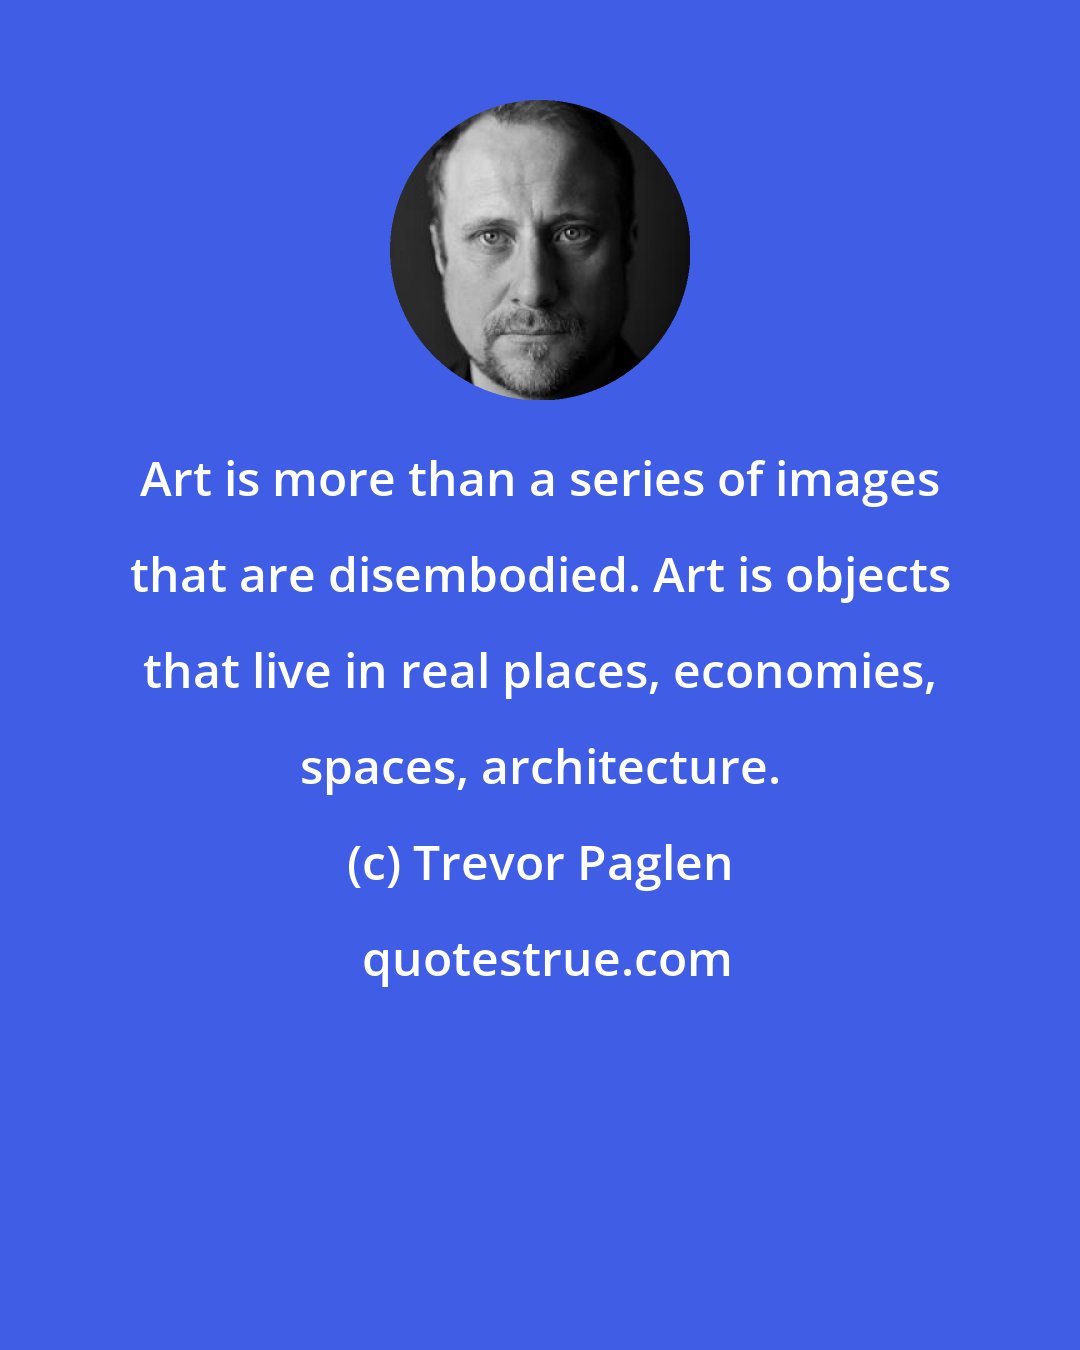 Trevor Paglen: Art is more than a series of images that are disembodied. Art is objects that live in real places, economies, spaces, architecture.